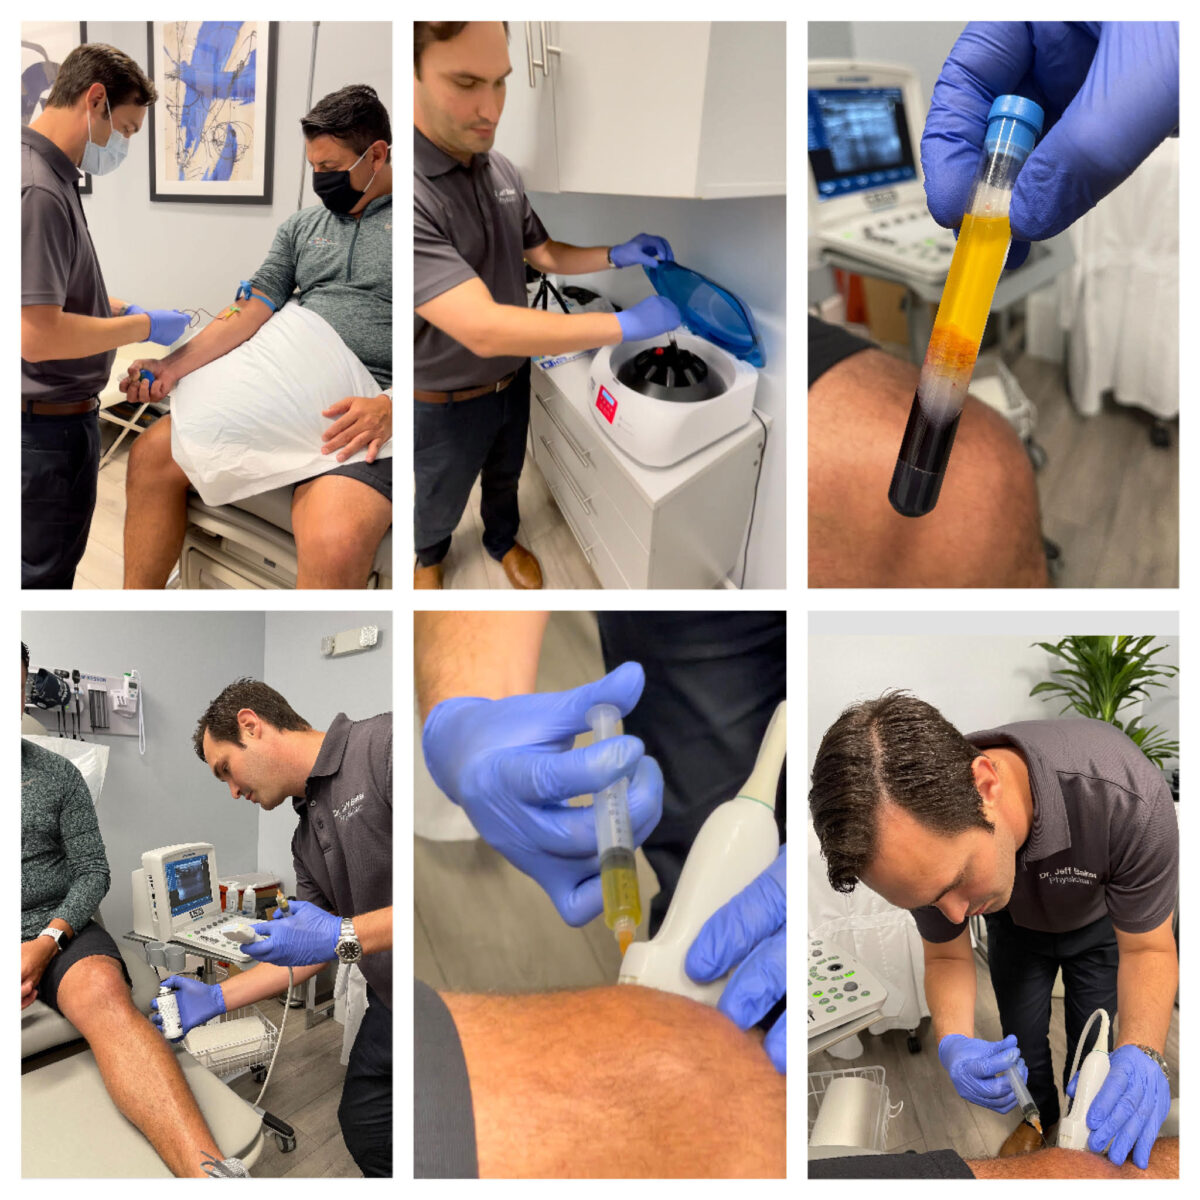 acl-therapy-doc-1200x1200.jpg